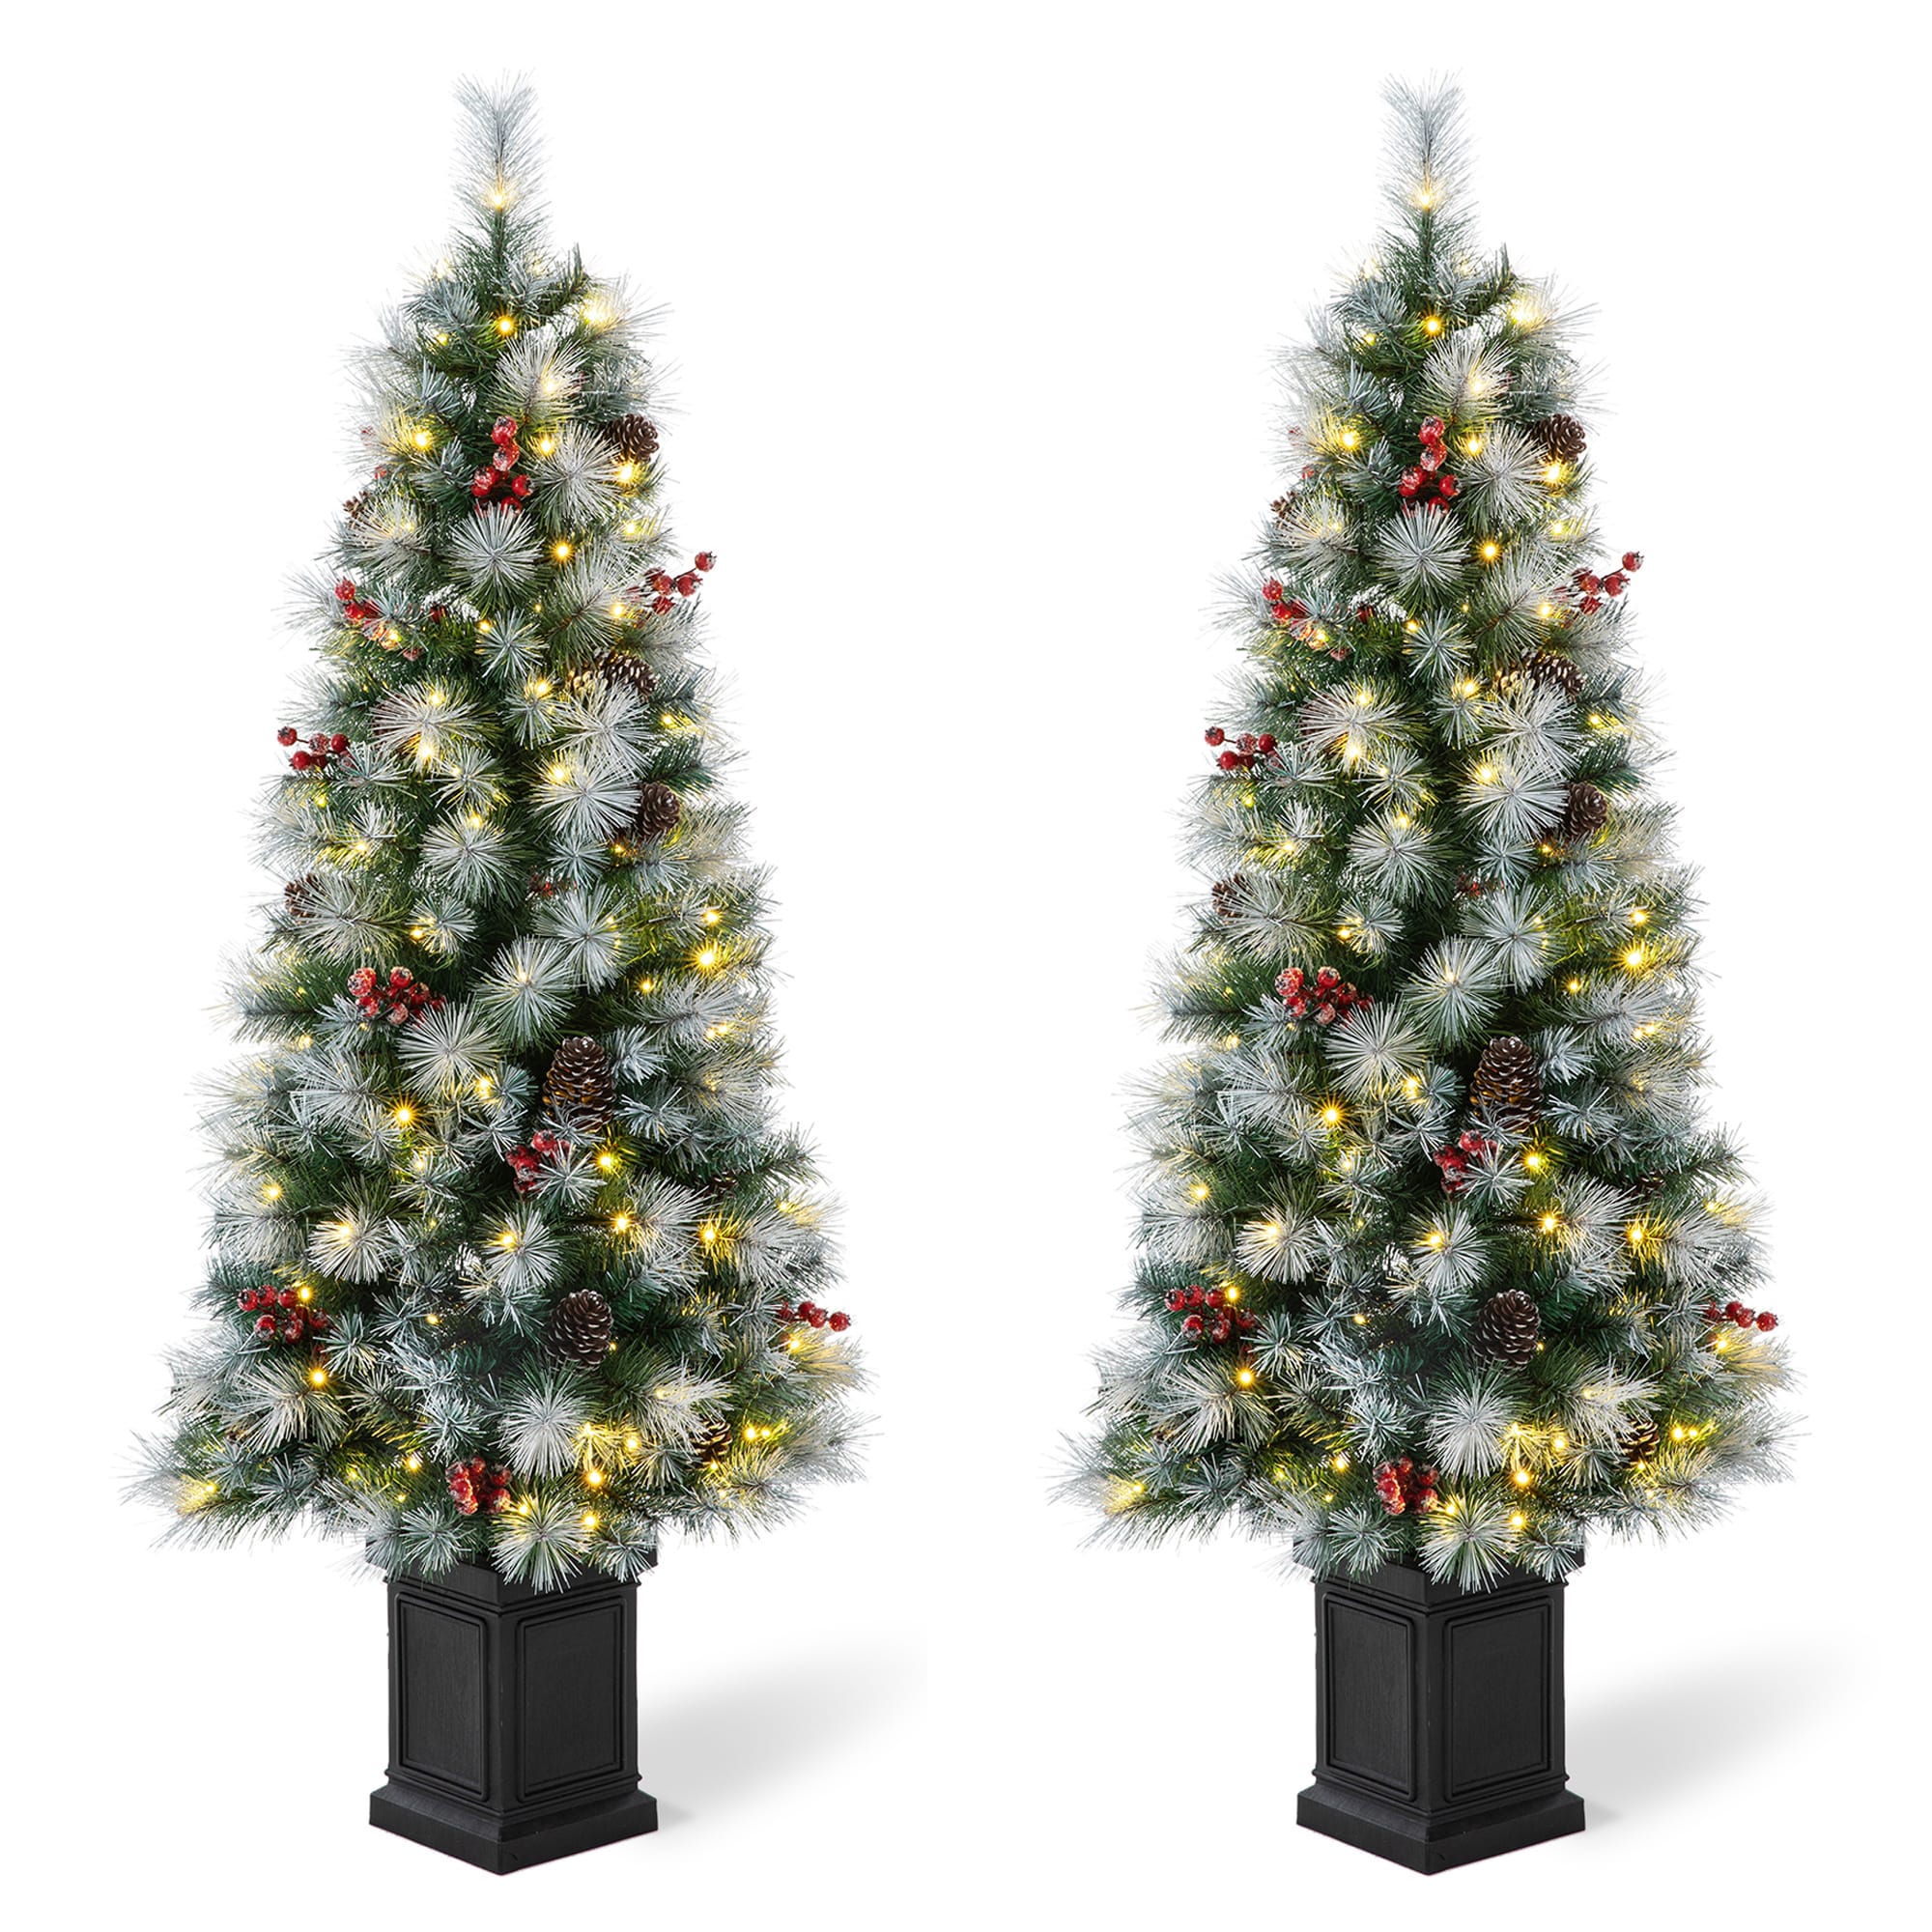 Potted Artificial Christmas Trees at Lowes.com